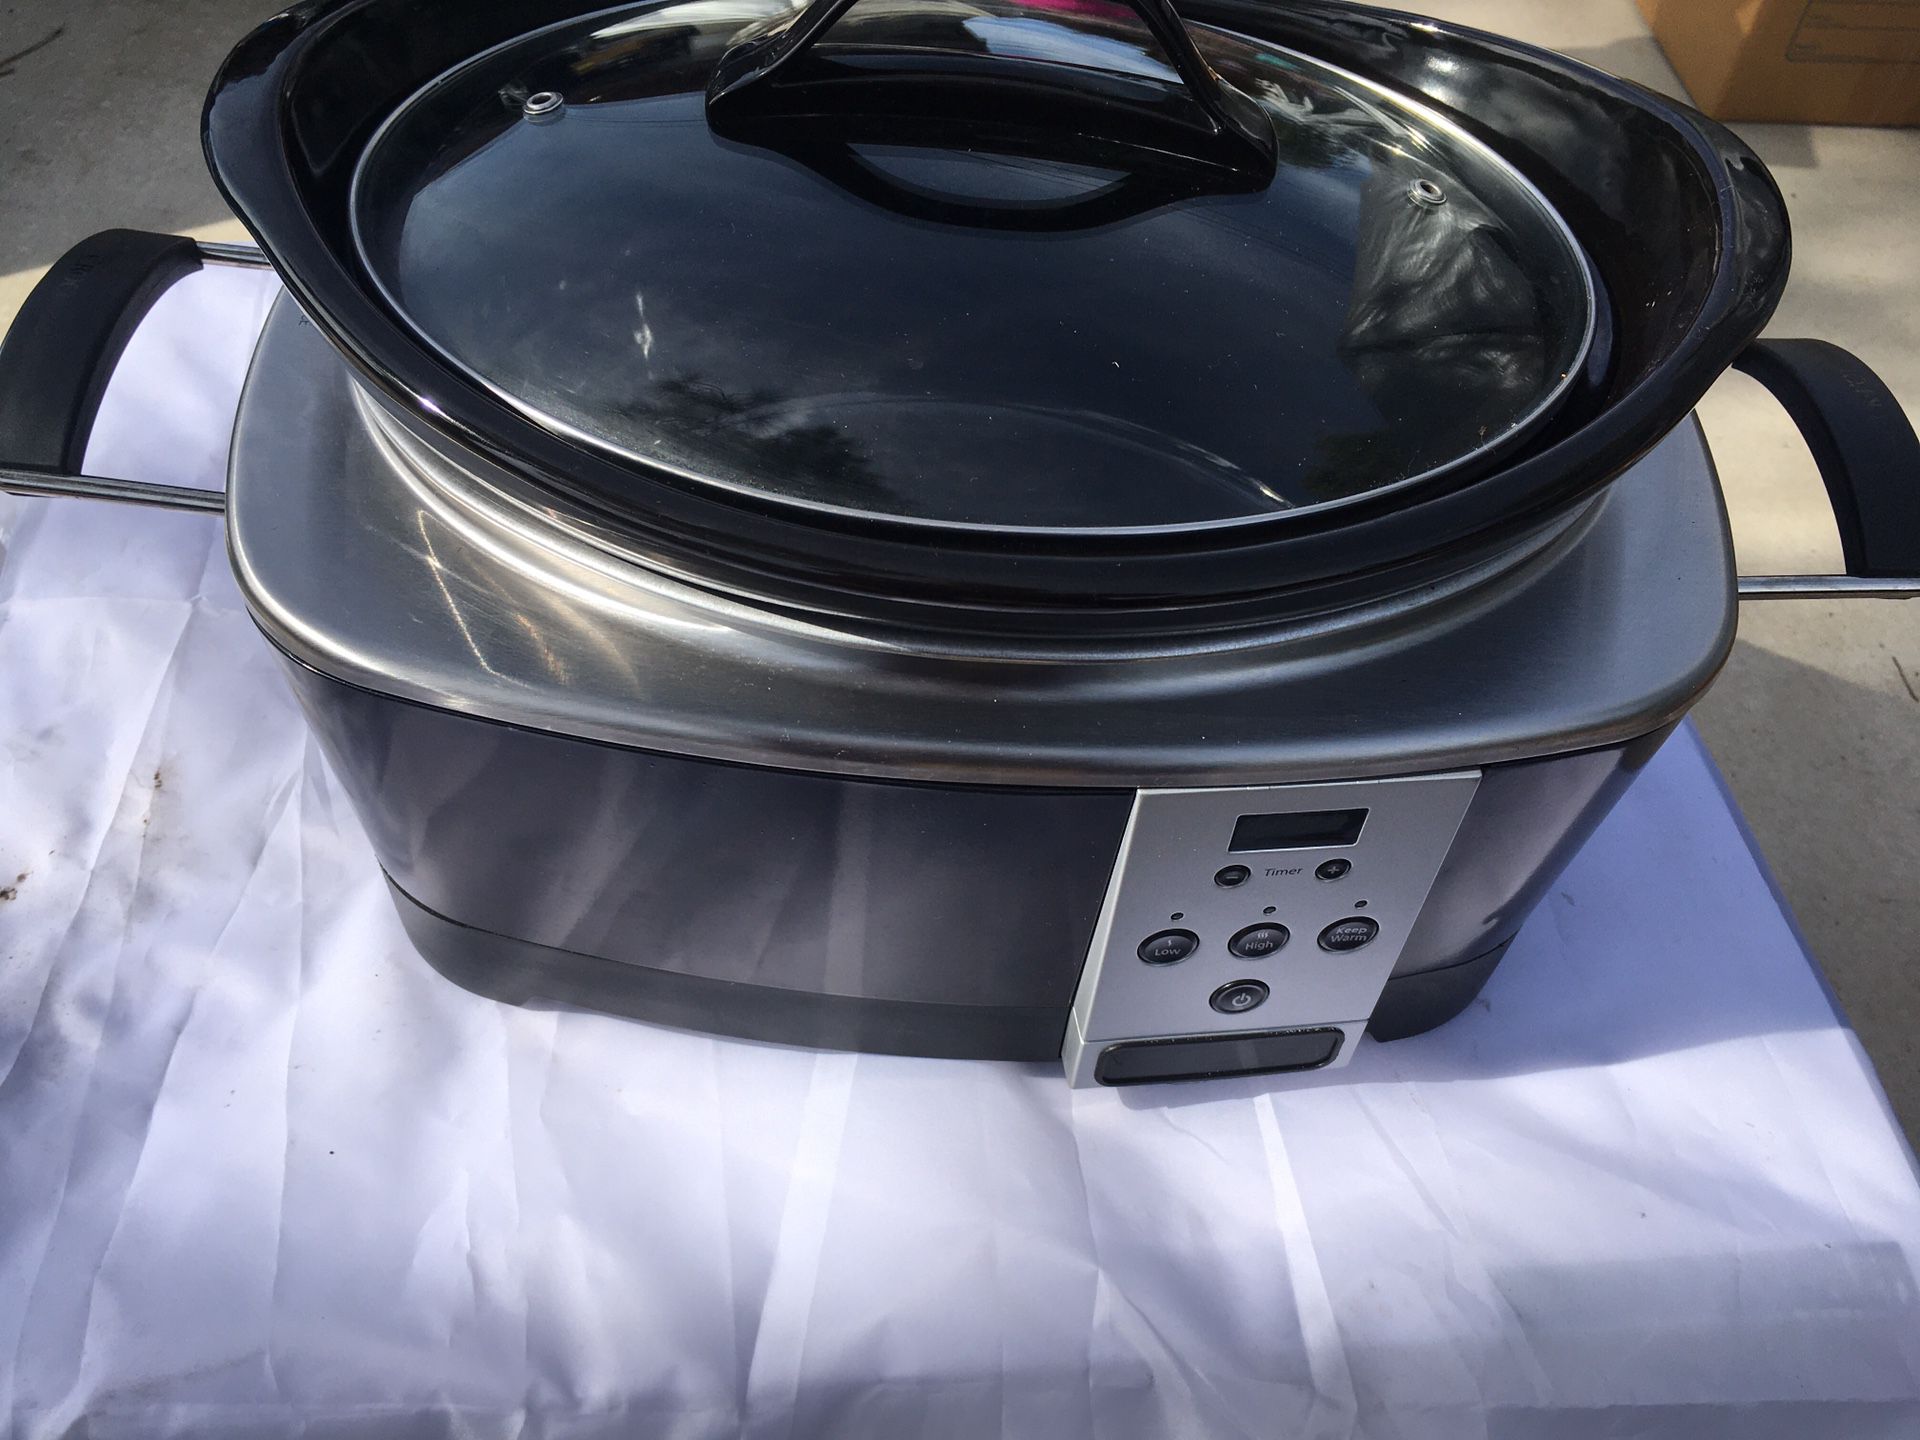 Crock pot Slow cooker in a great working condition SCCPQc600B